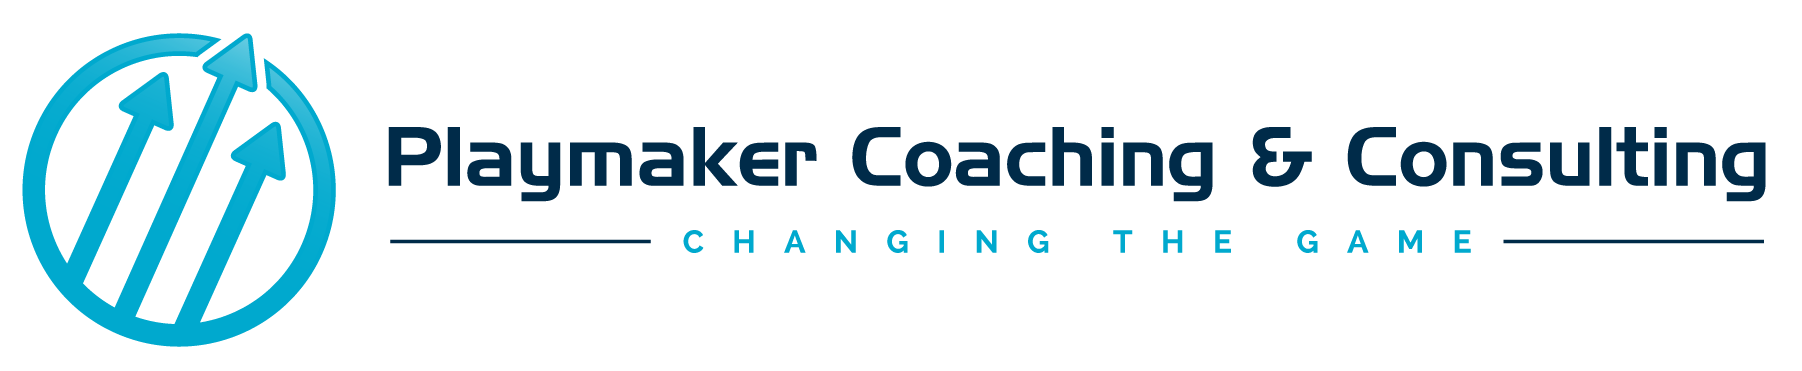 Playmaker Coaching & Consulting